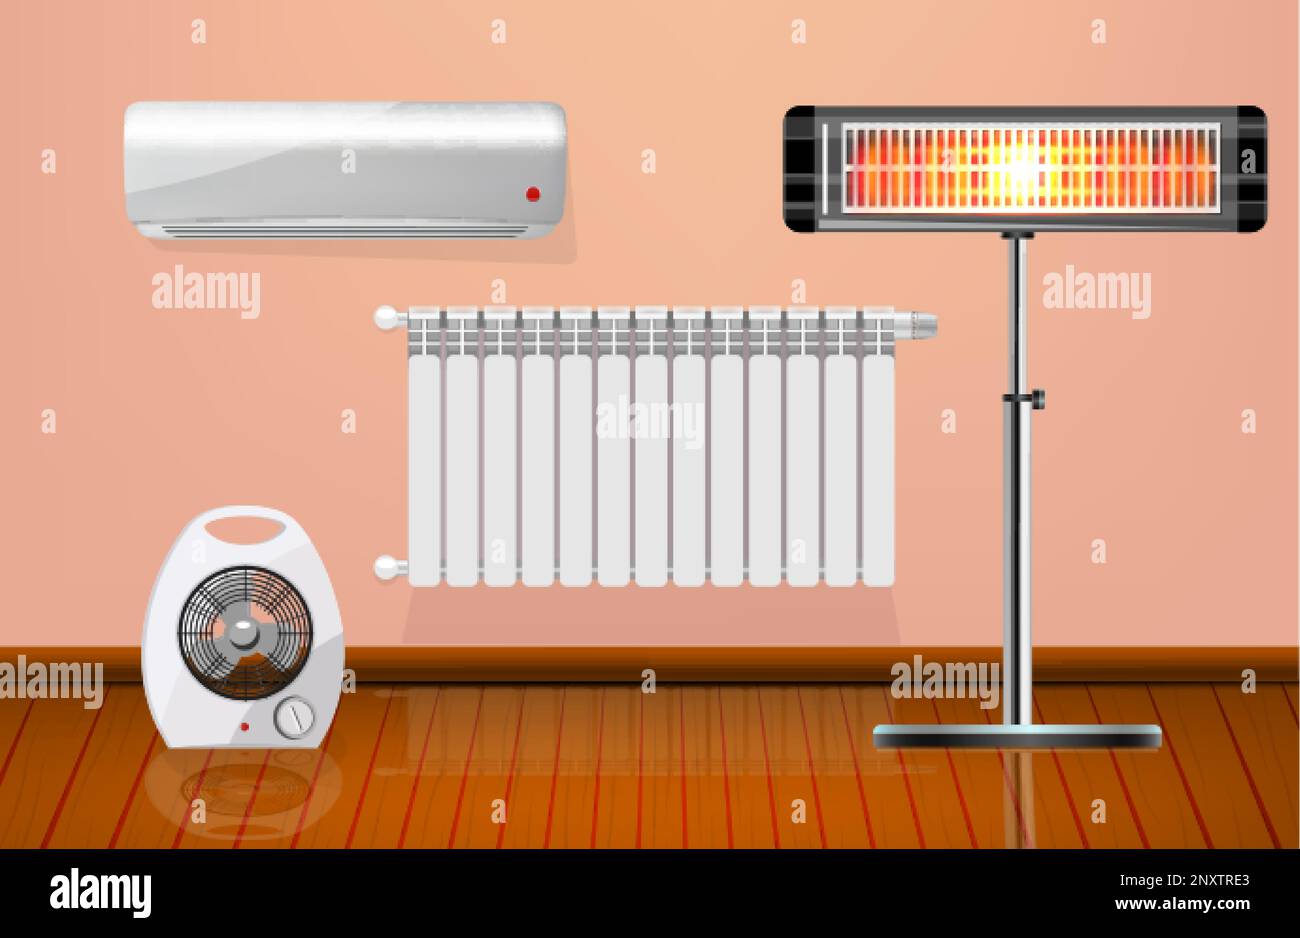 Flat heaters set with radiator electric fan conditioner and infrared heating appliance in room vector illustration Stock Vector